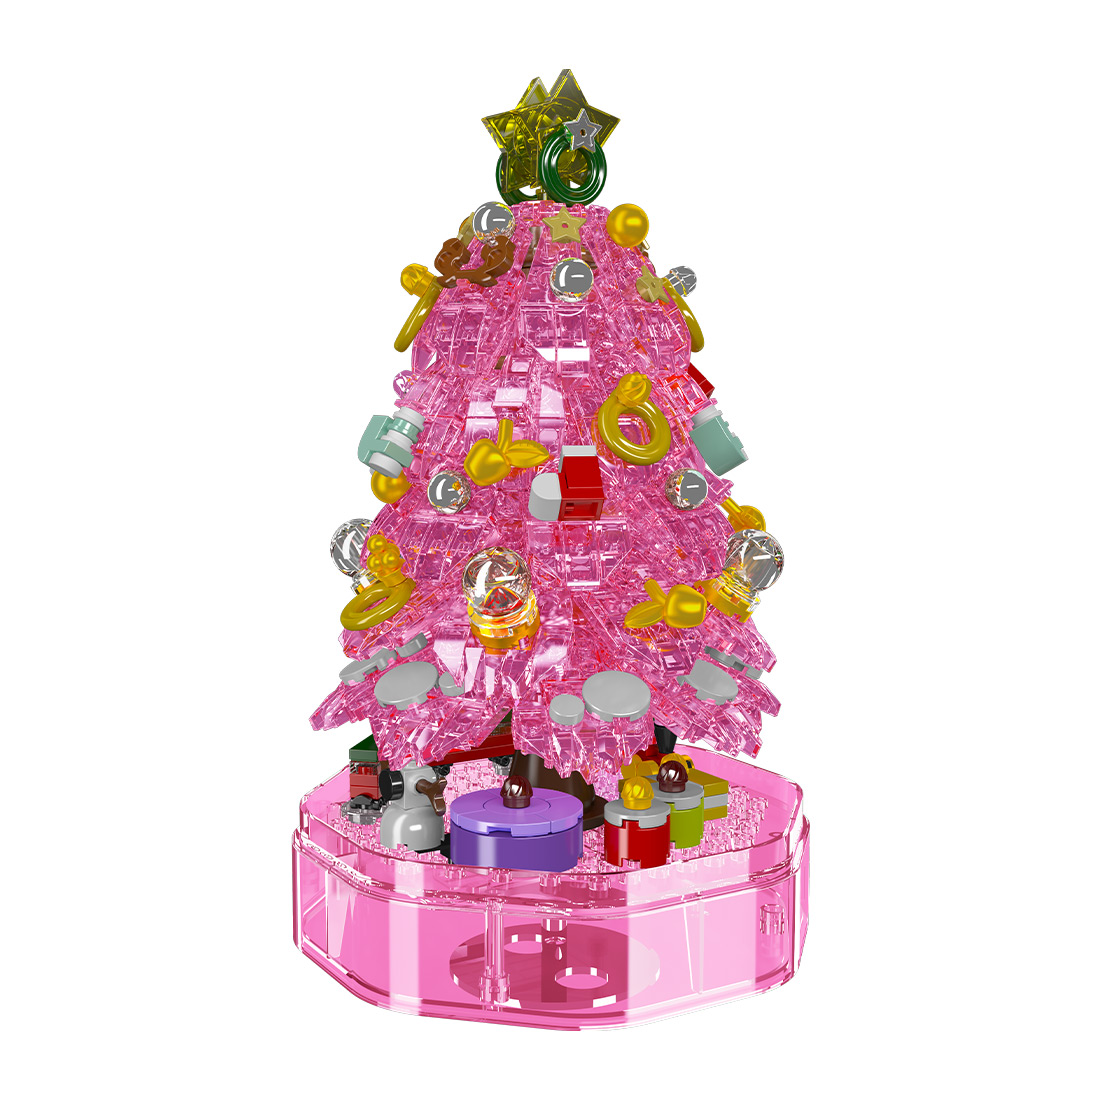 Christmas Music Box Model Assembly Toy Small Particles Building Blocks Set (Dynamic Version/688PCS/Pink)